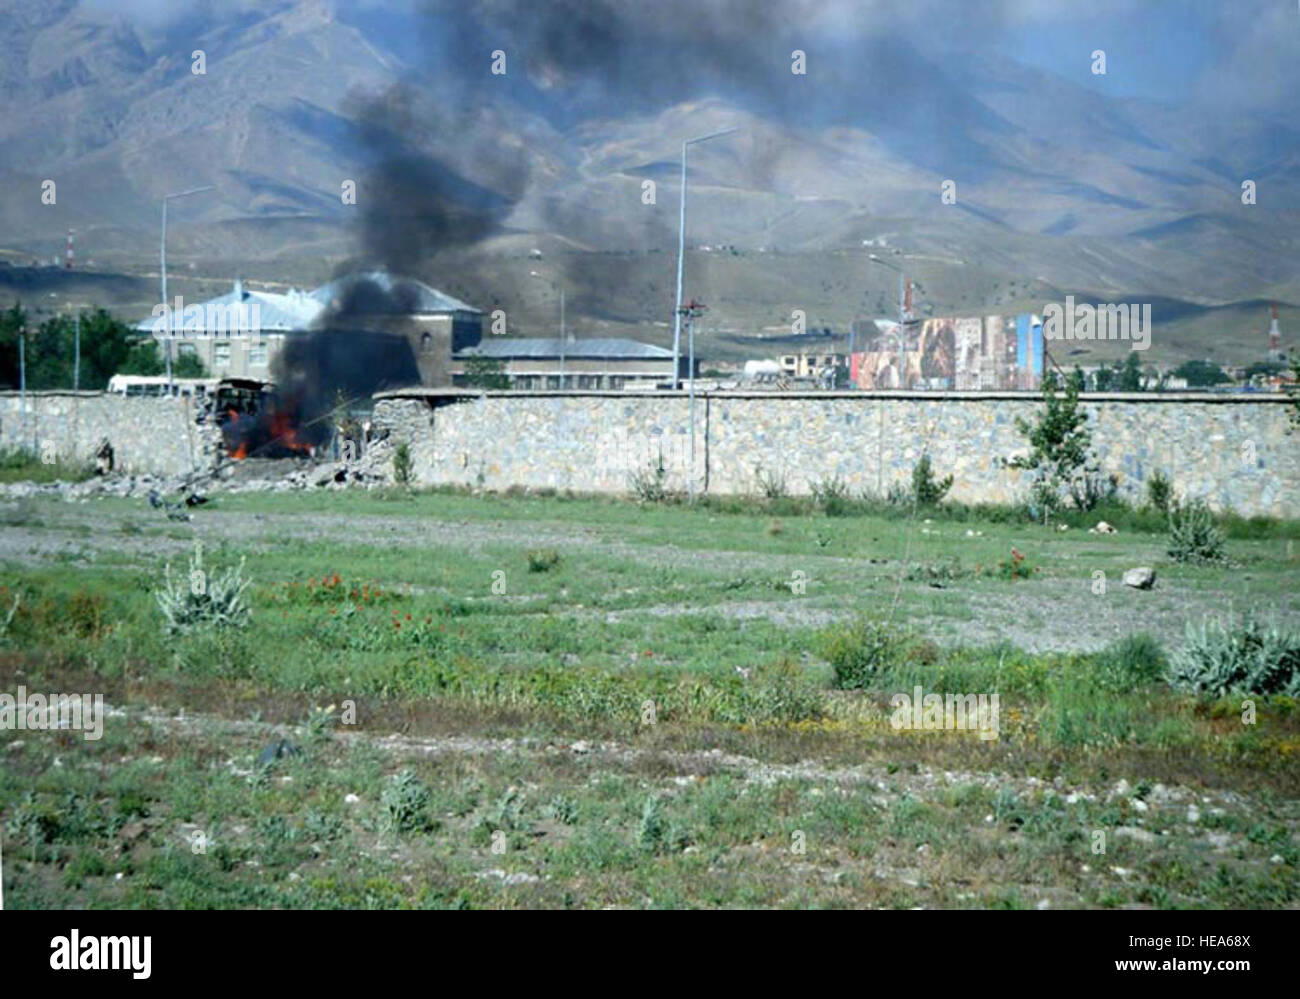 View from an Afghan National Army Air Corps Mi-17 helicopter of site where suicide vehicle borne improvised explosive device detonated in Kabul, Afghanistan on May 18, 2010.  Lt. Col. Olaf Holm). Stock Photo